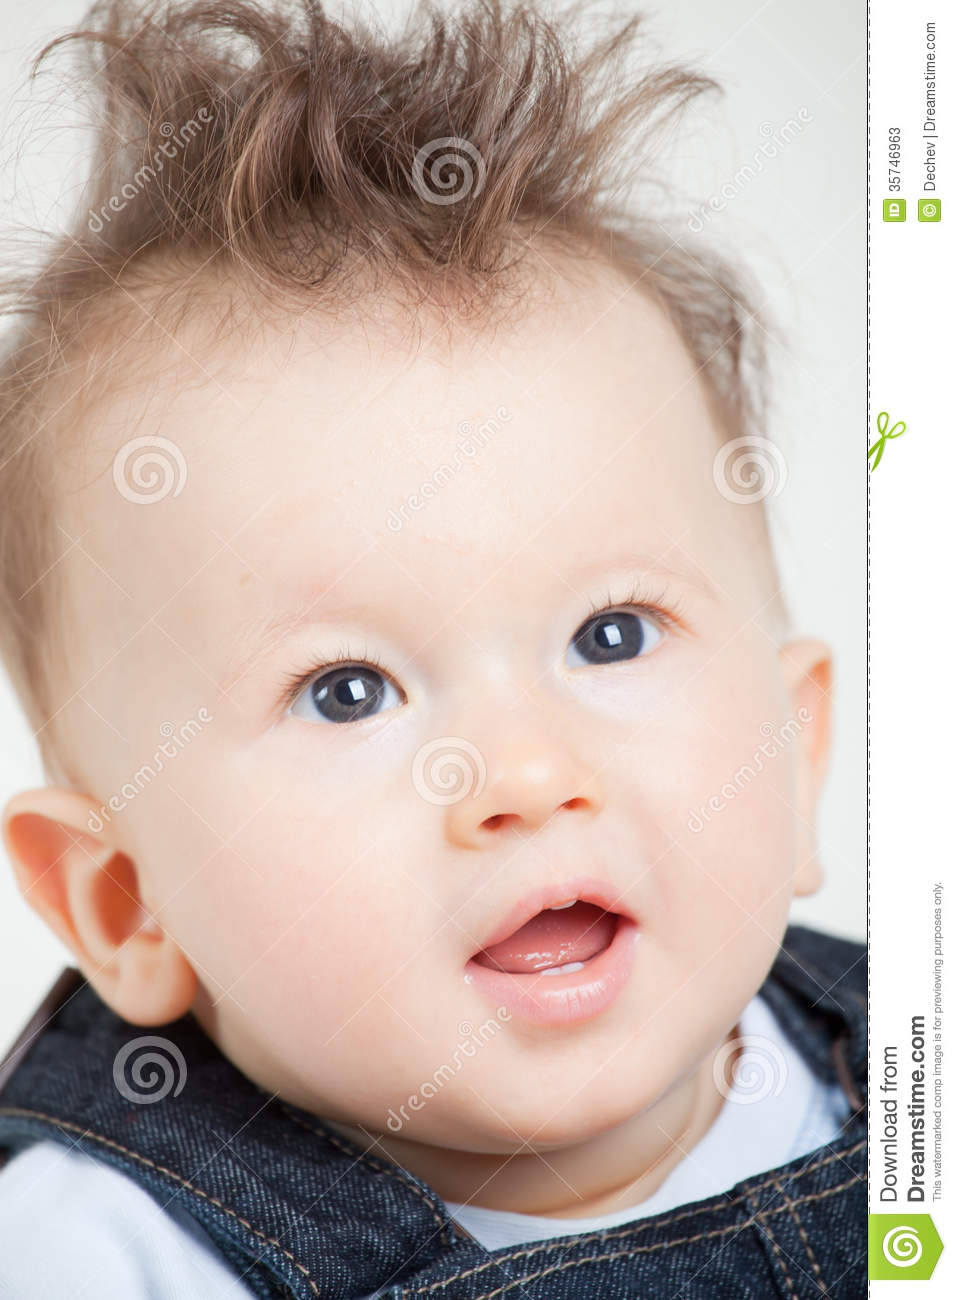 Baby With Fancy Haircut Stock Photos   Image  35746963